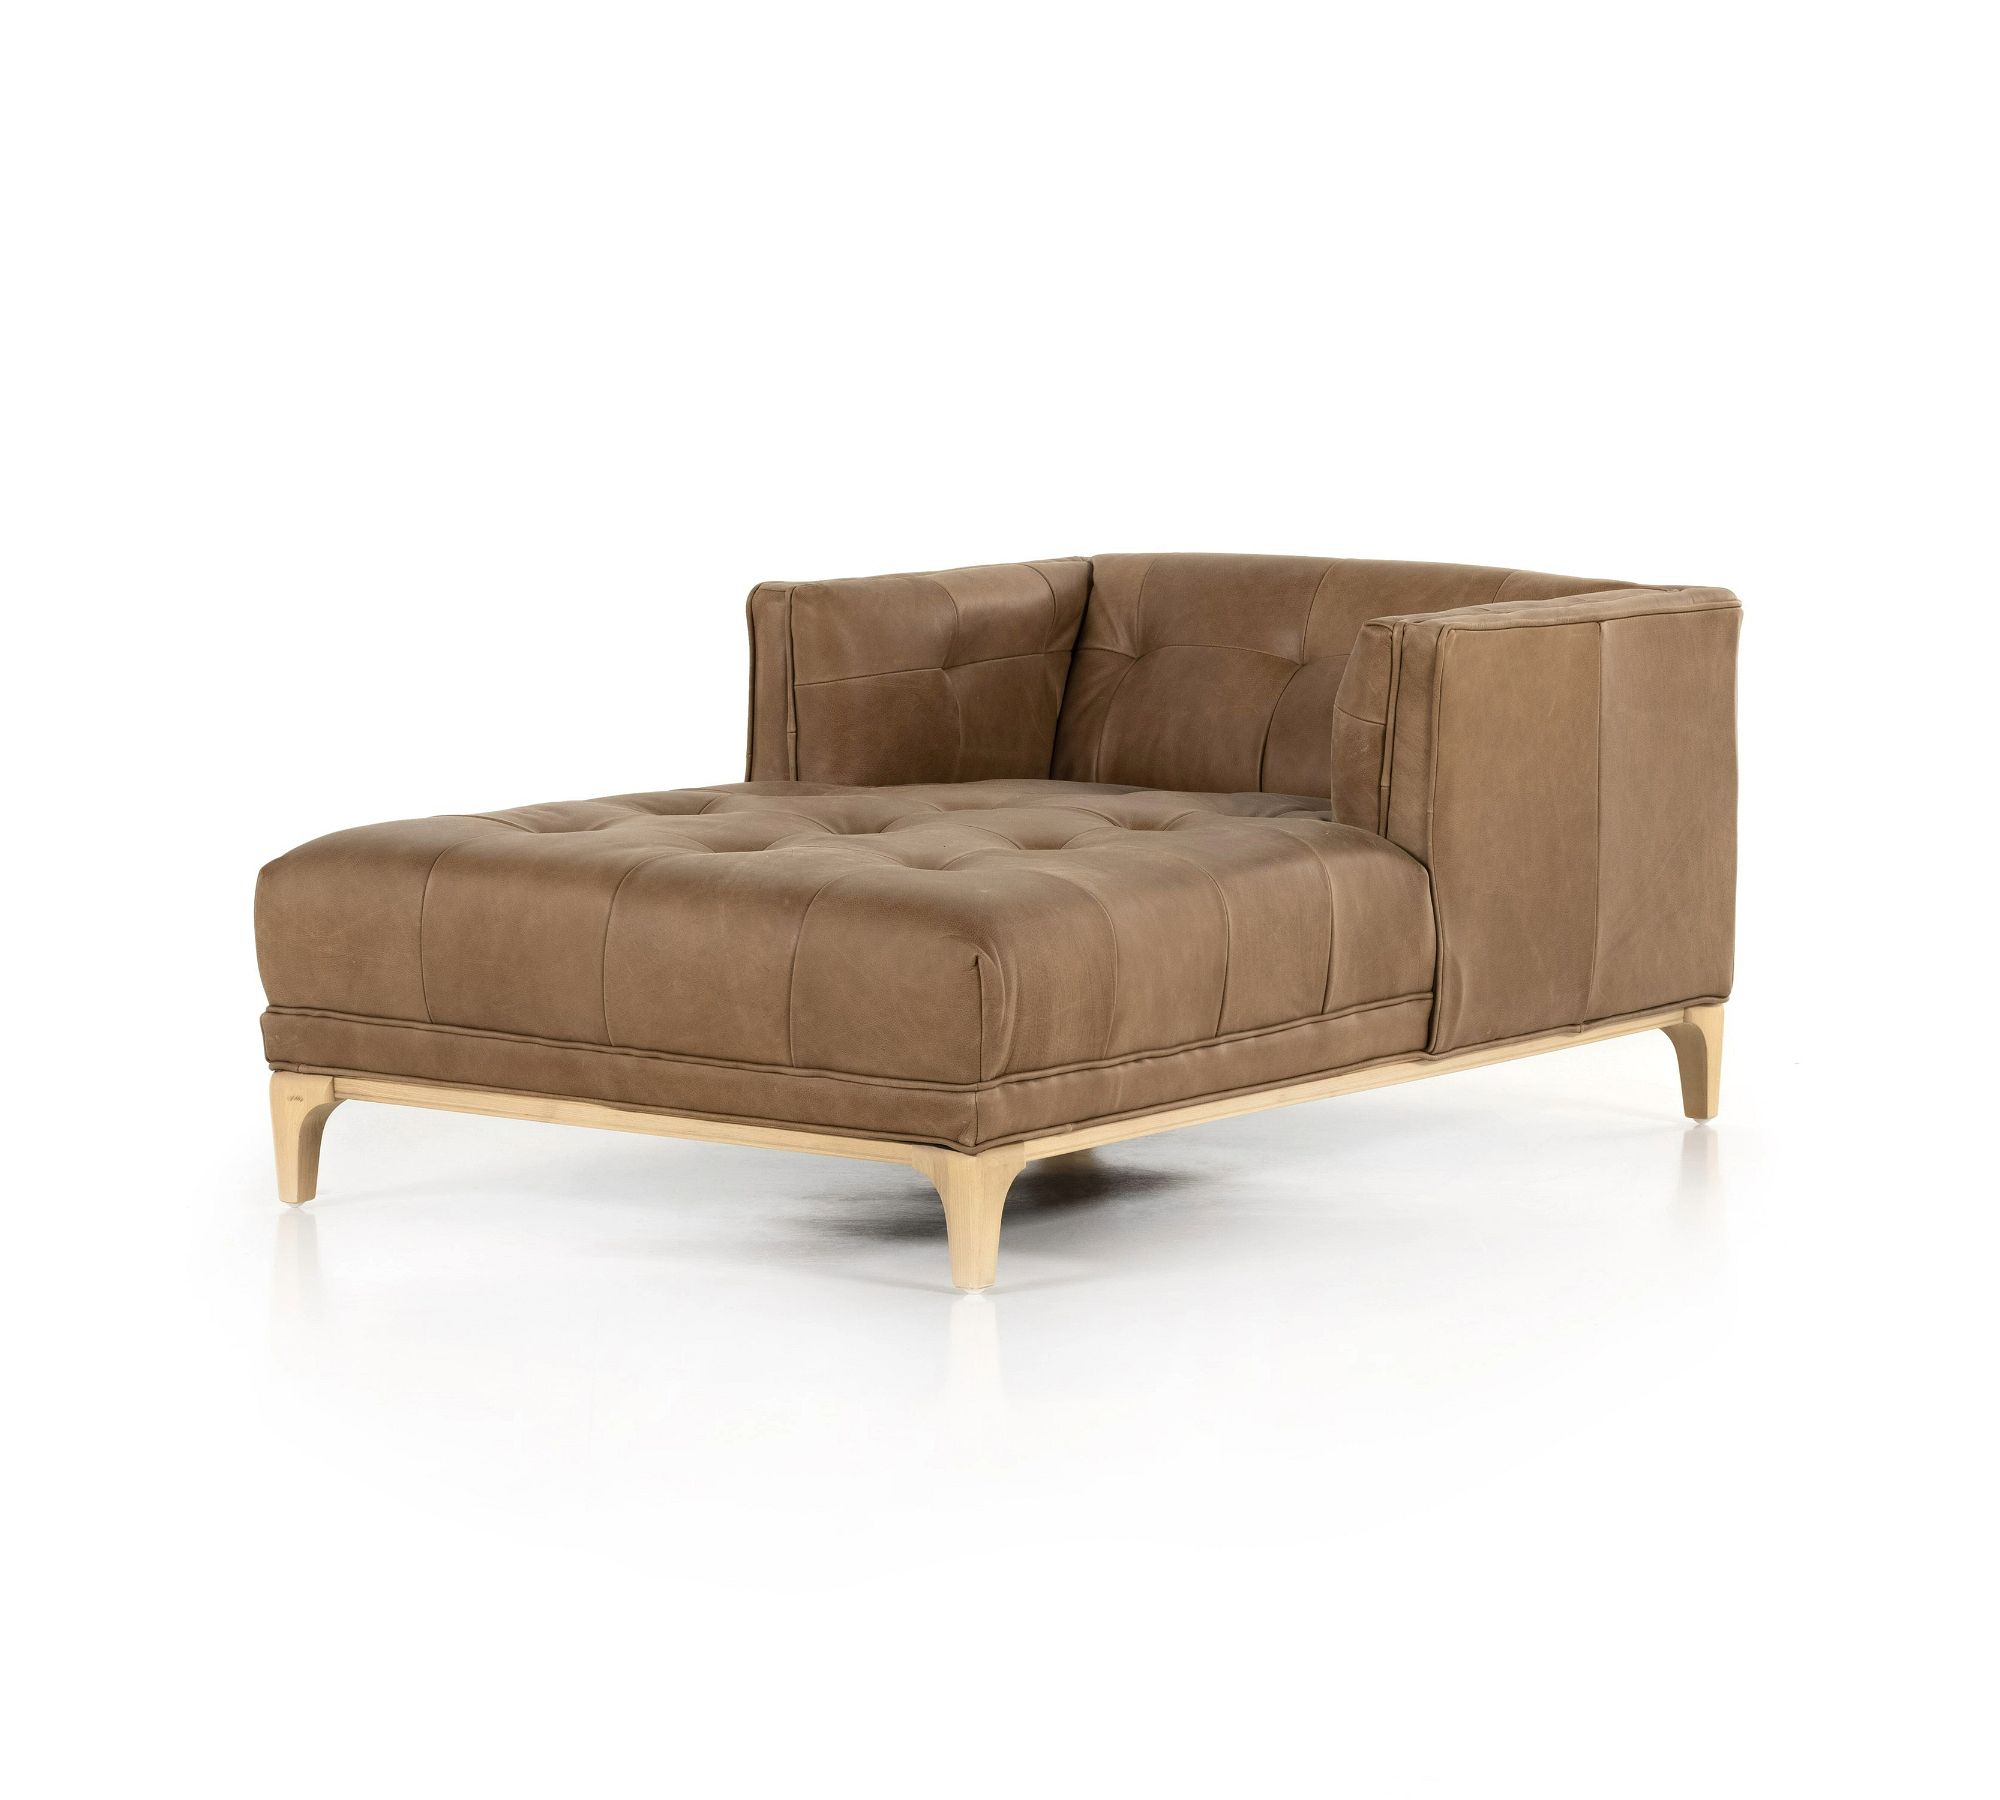 Apollo Leather Chaise Lounger